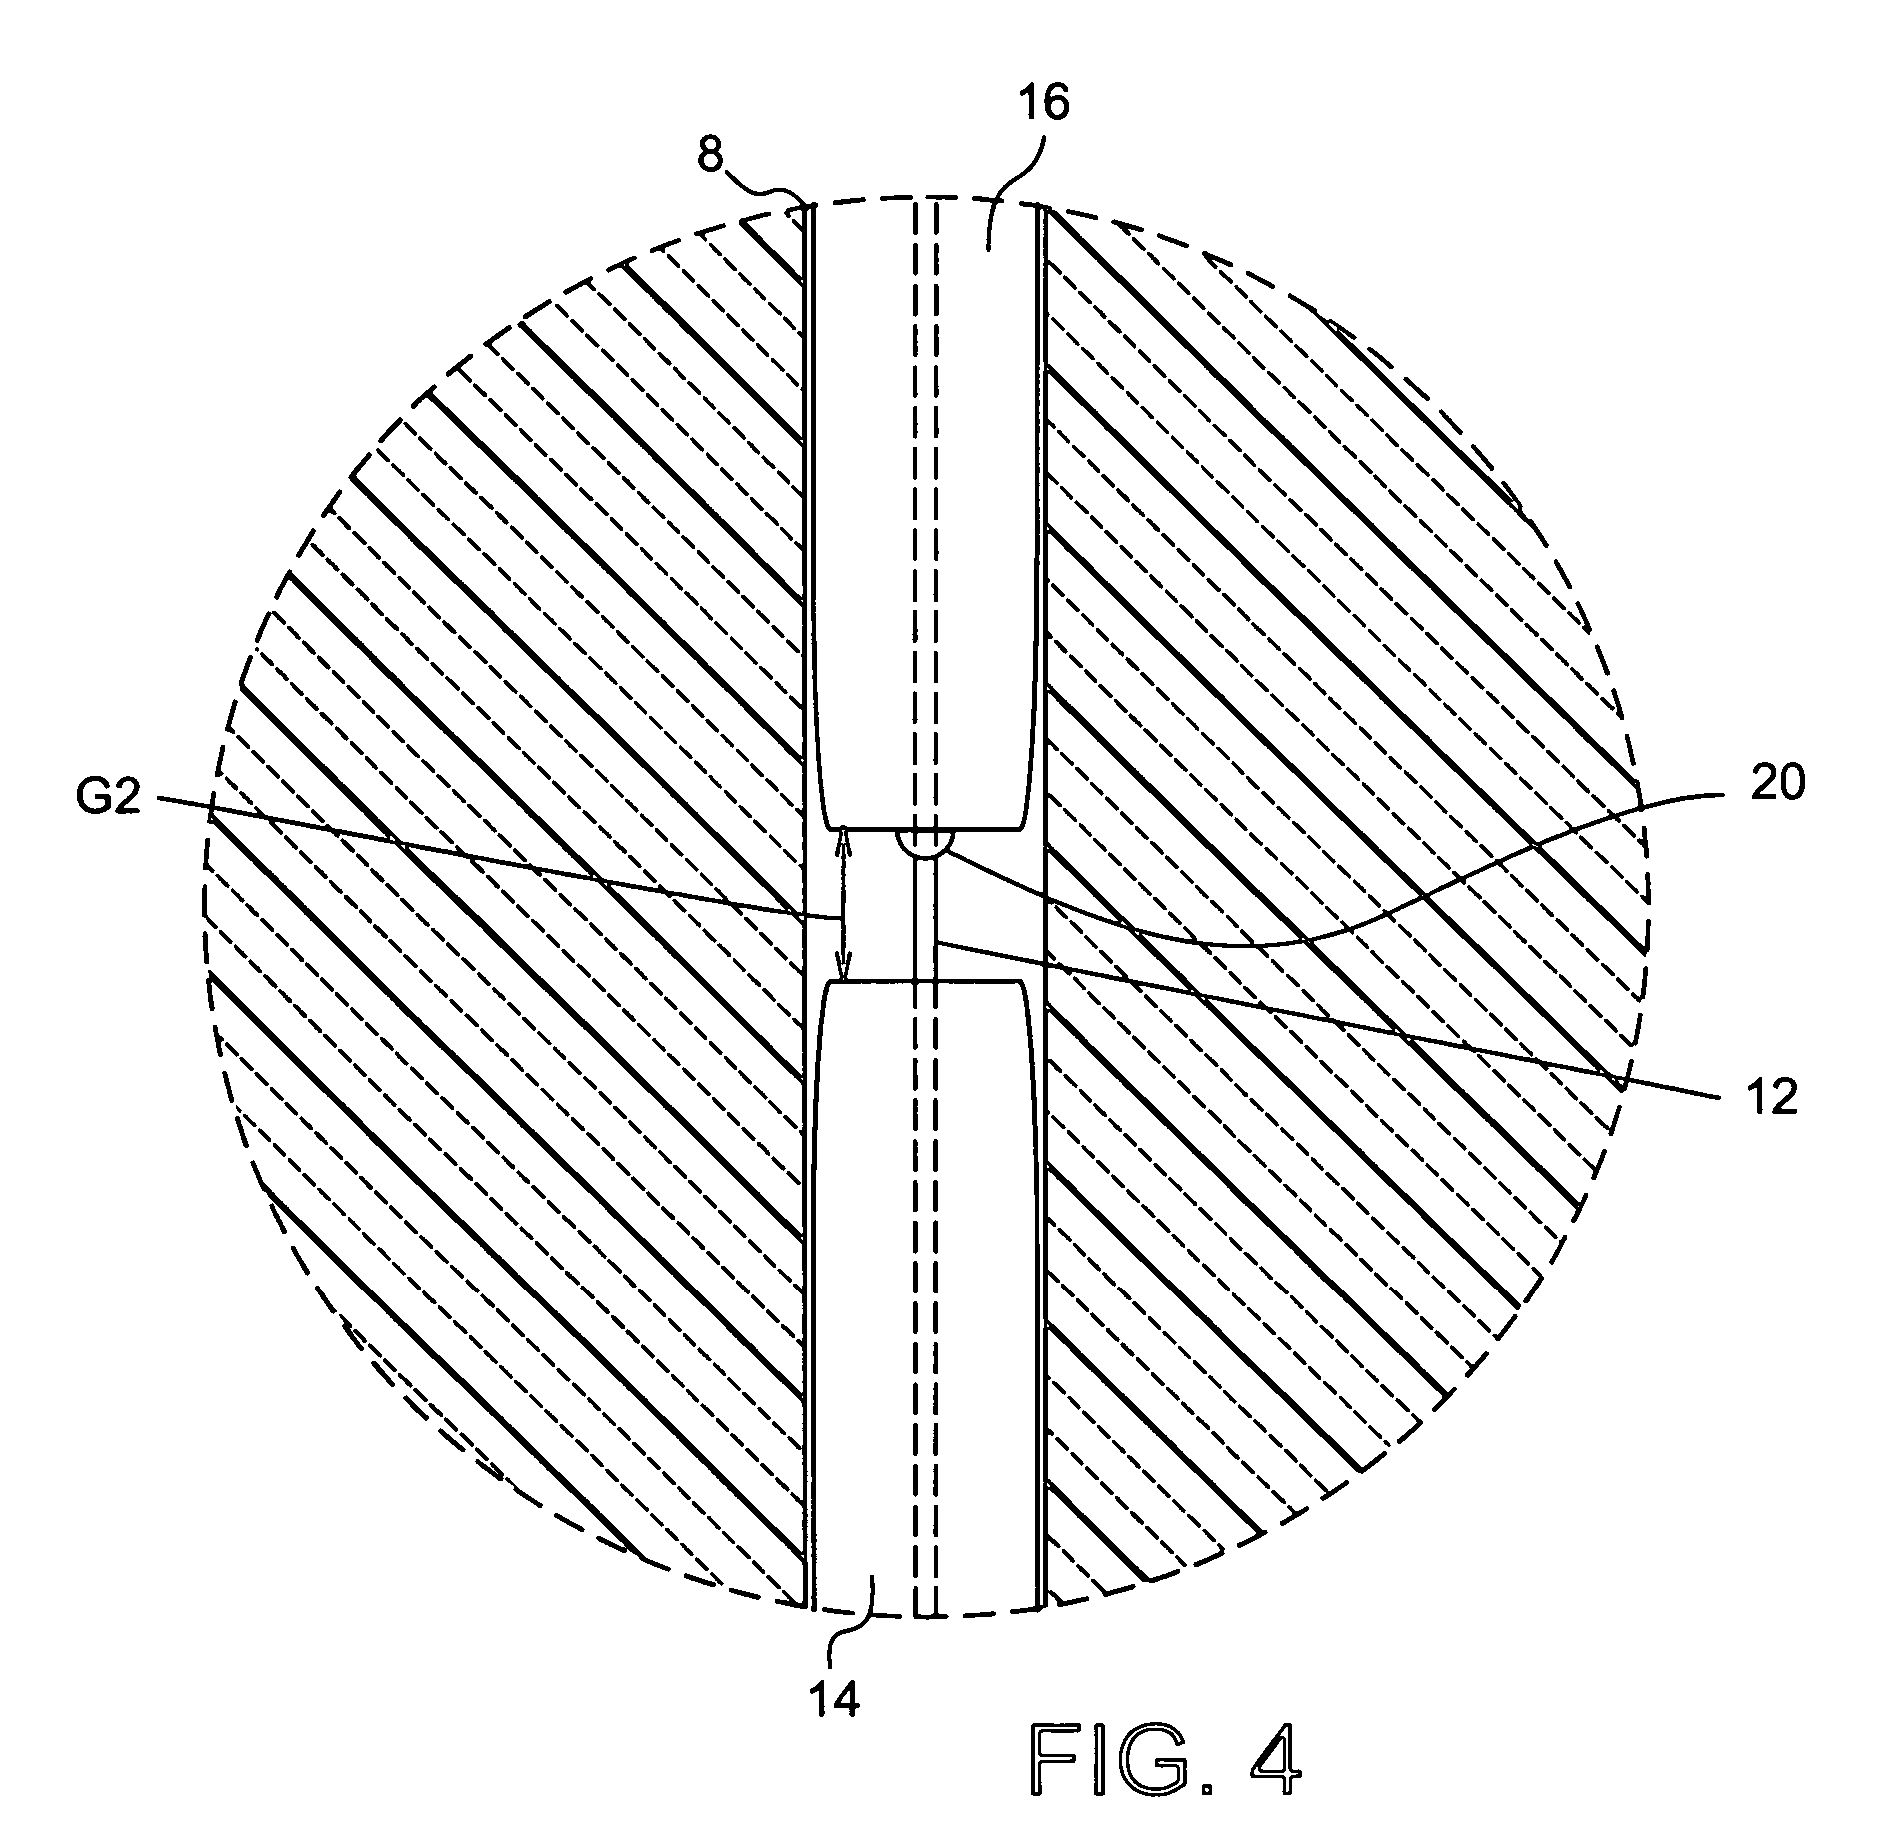 Self extinguishing safety candle wicks and methods of manufacture of the wicks